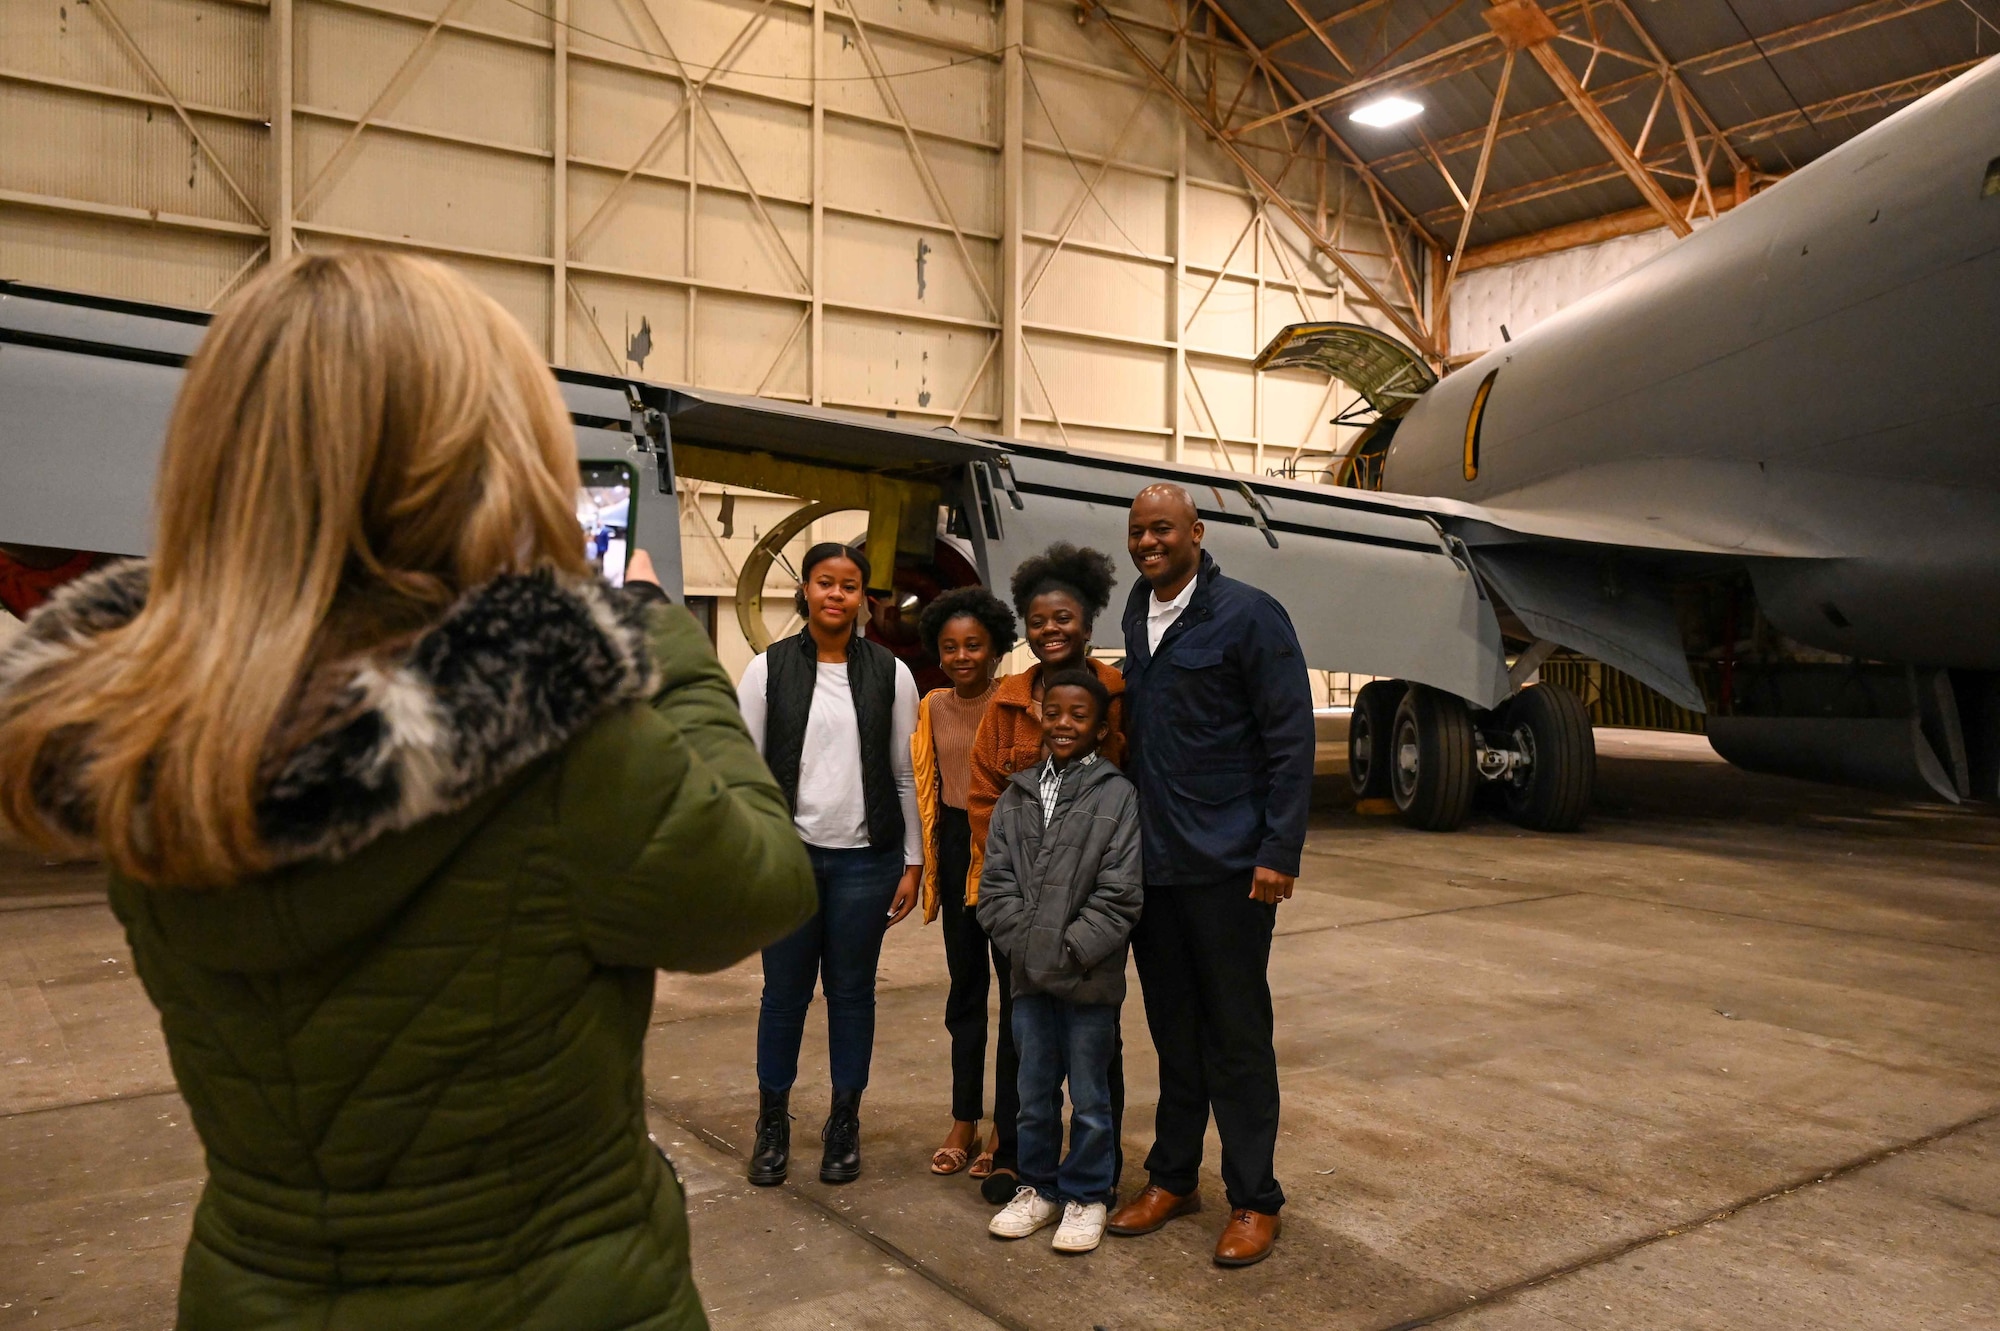 Jimmel Winkfield, 97th Aircraft Maintenance Squadron deputy director, poses with his children after being administered the oath of enlistment at Altus Air Force Base (AFB), Oklahoma, Dec. 28, 2023. Winkfield spent six years in active-duty service with the Air Force before working as a civilian at Altus AFB. (U.S. Air Force photo by Airman 1st Class Kari Degraffenreed)